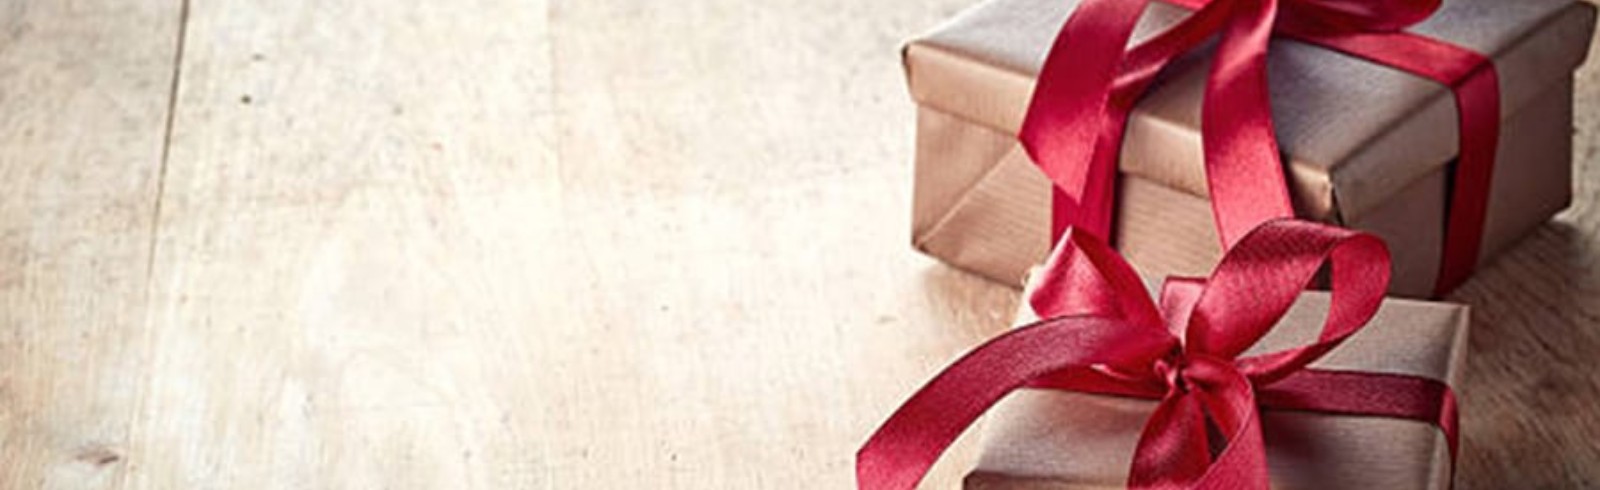 2 gift wrapped by brown papers and red ribbon on the wooden floor